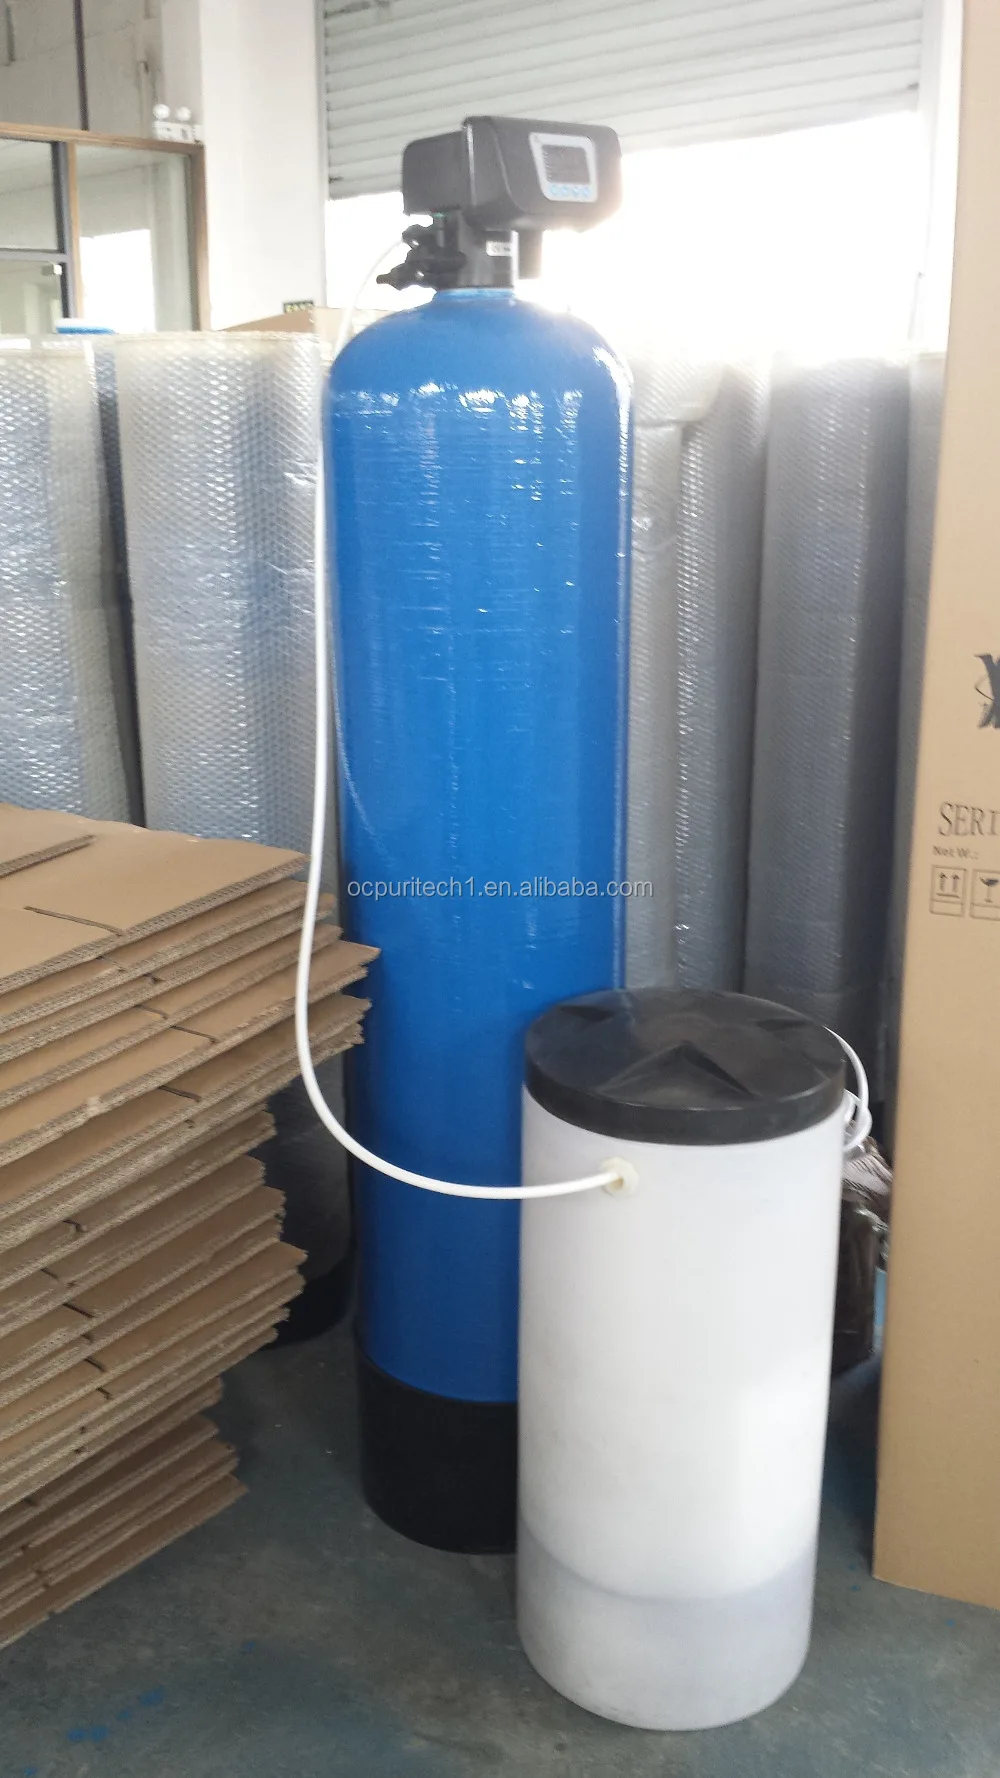 Wholesale price of home water softener with control valves